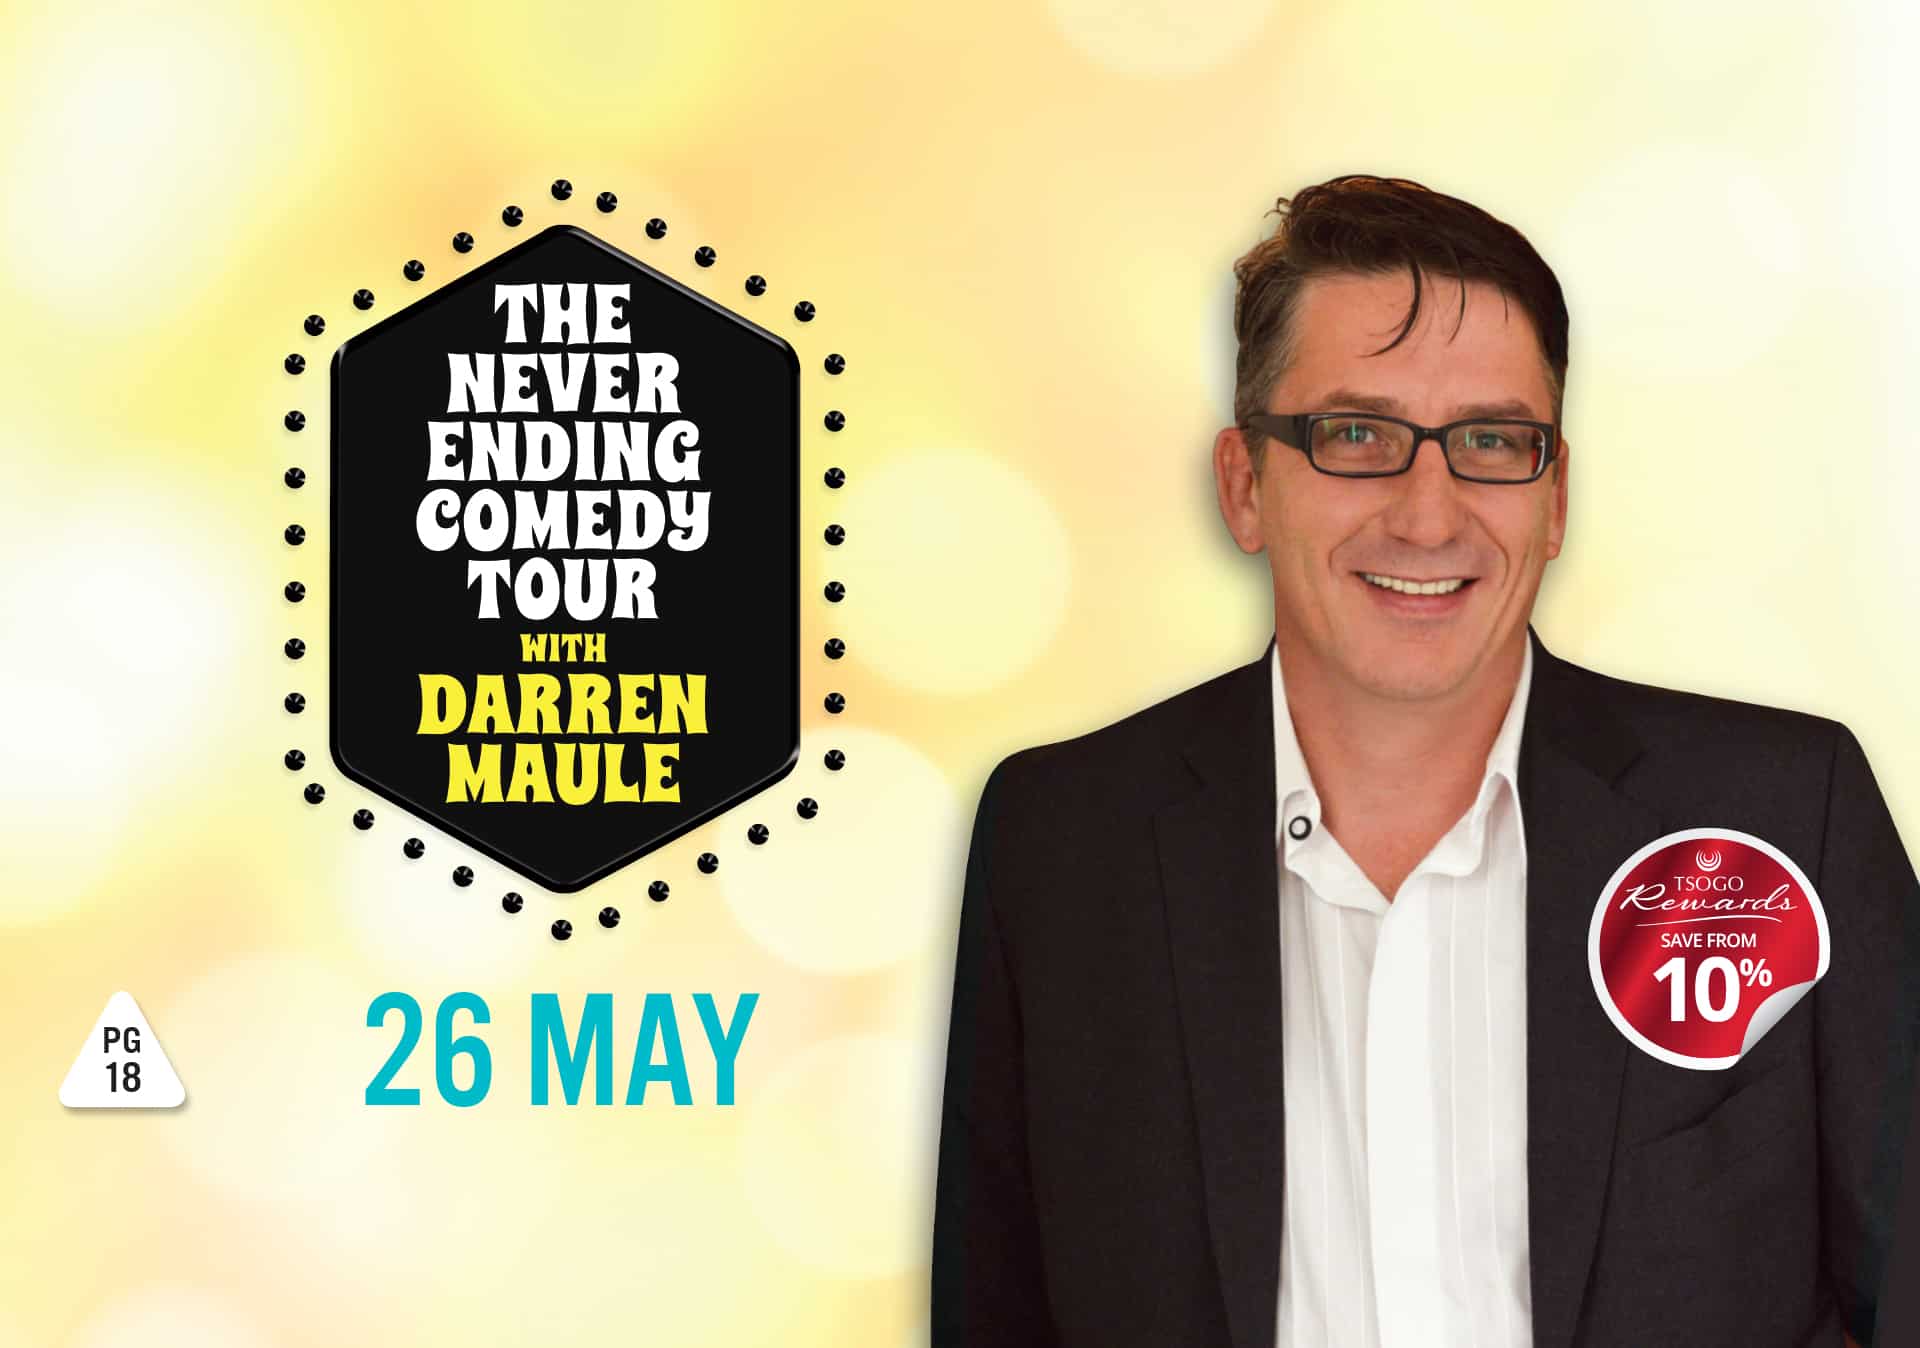 The Never Ending Comedy Tour with Darren Maule